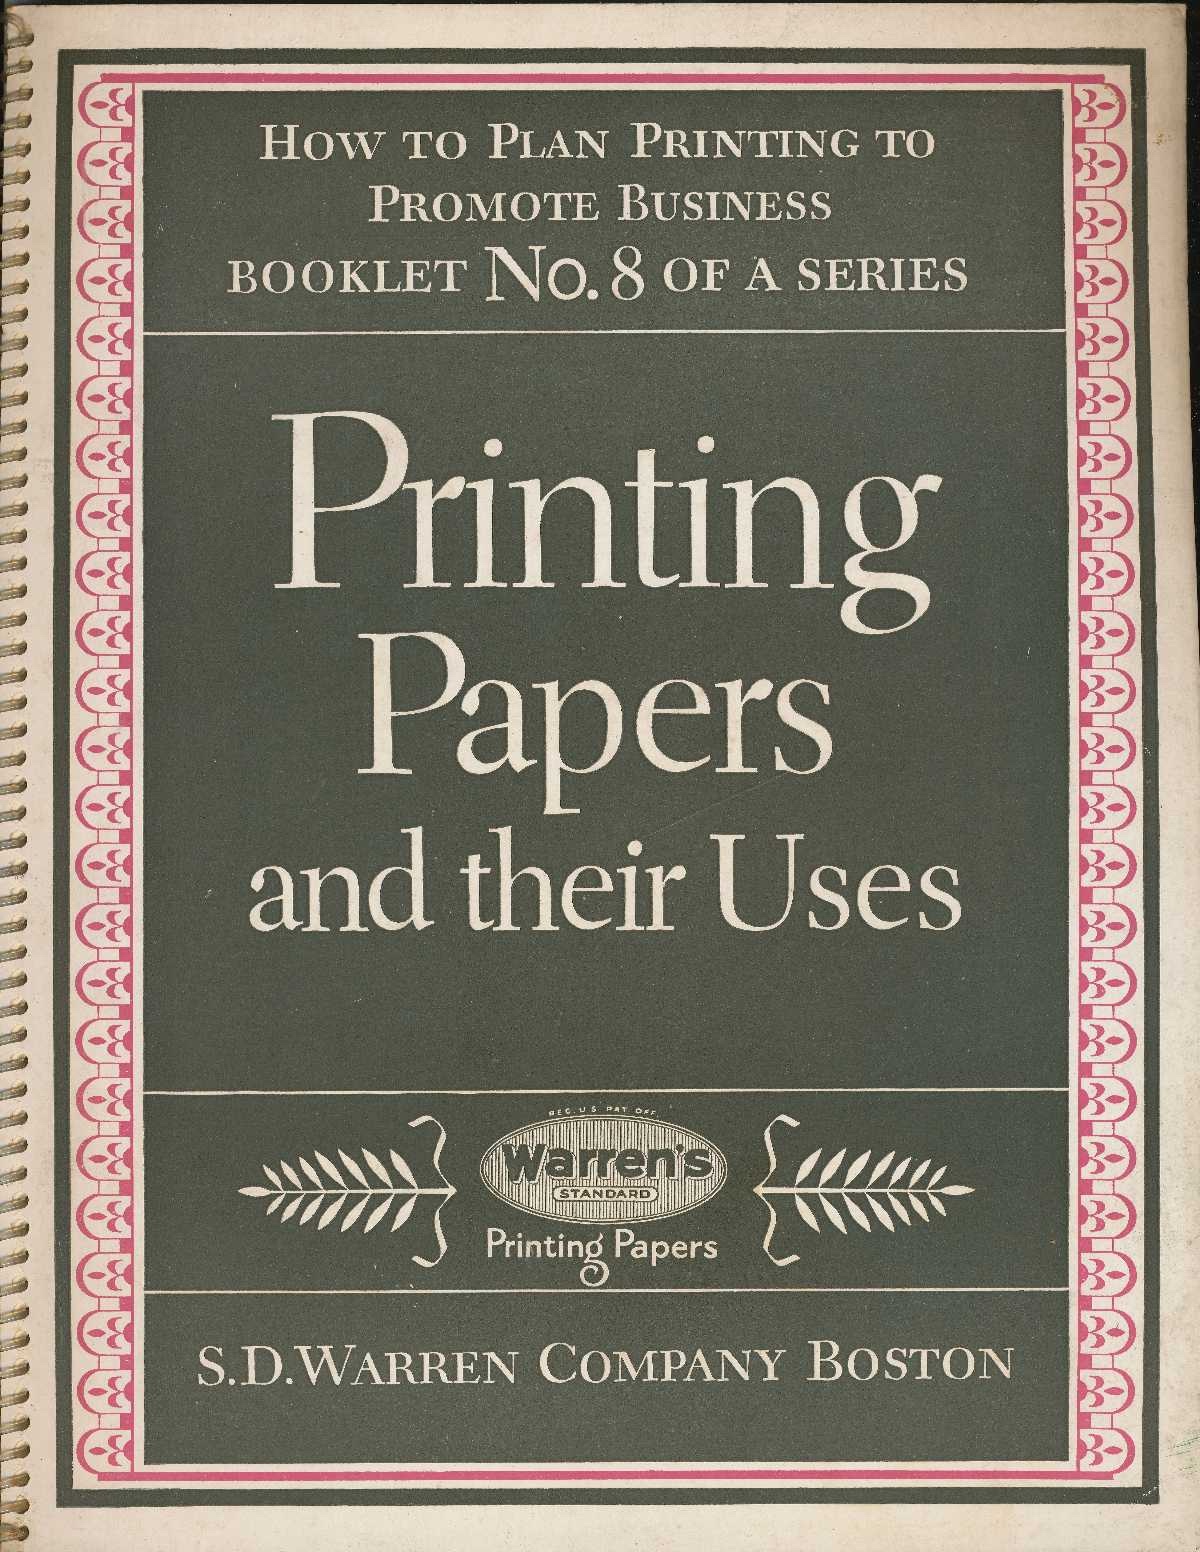 S. D. WARREN CO - Printing Papers and Their Uses: How to Plan Printing to Promote Business